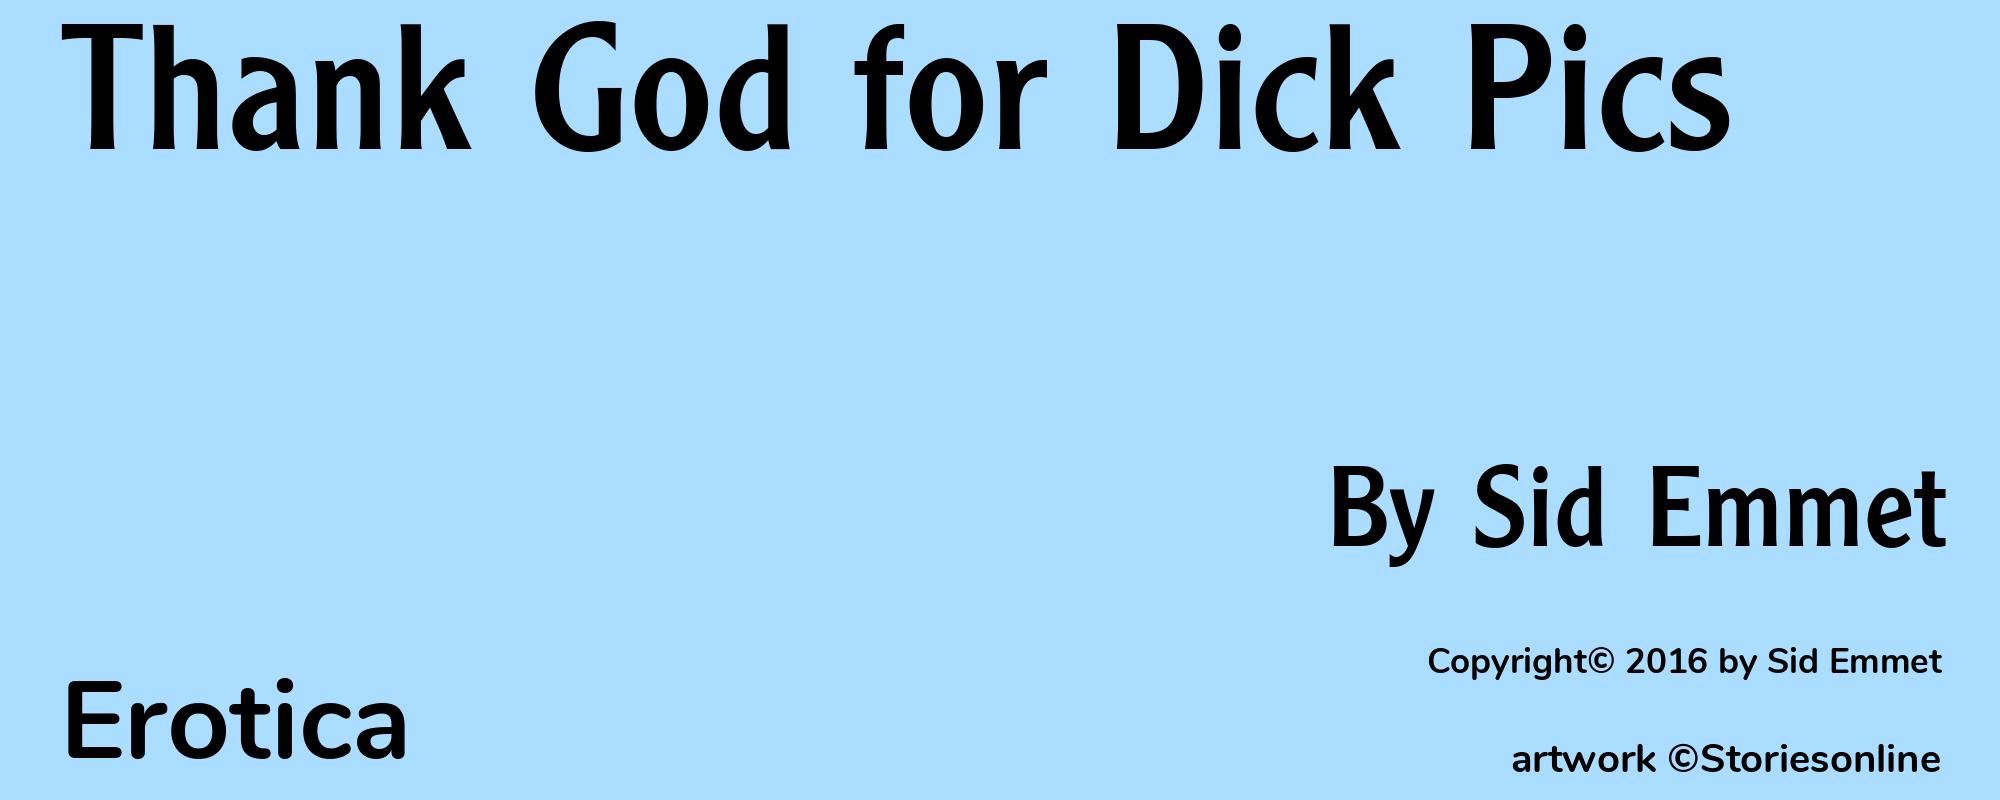 Thank God for Dick Pics - Cover